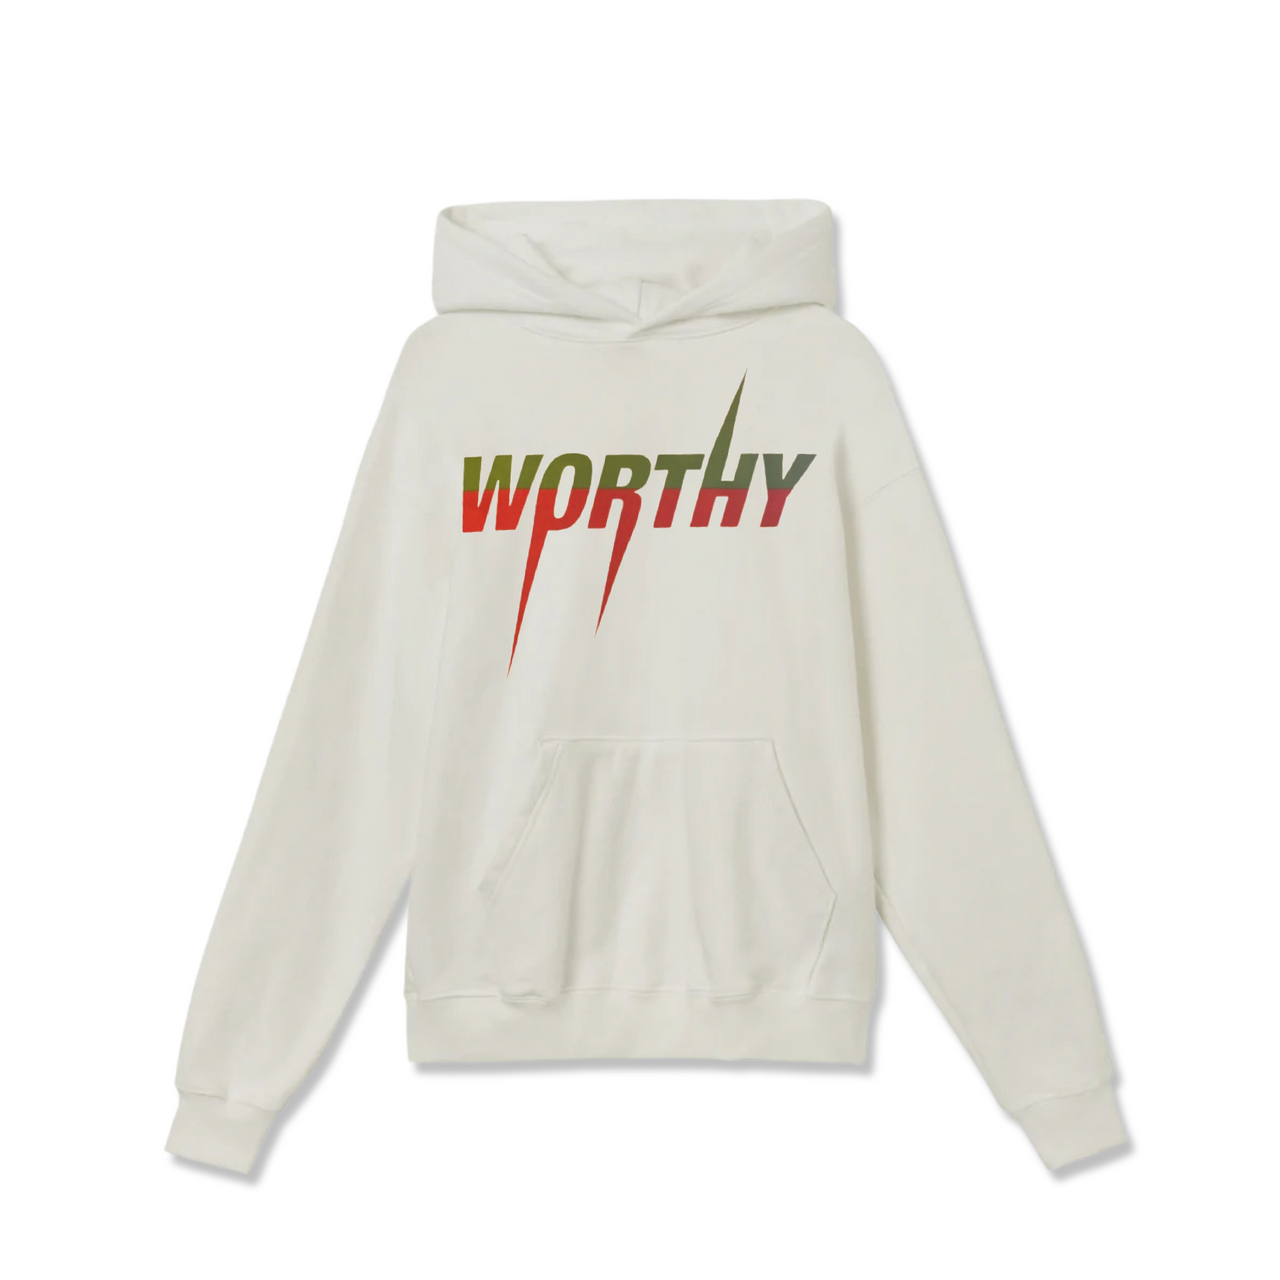 Worthy French Terry Hoodie